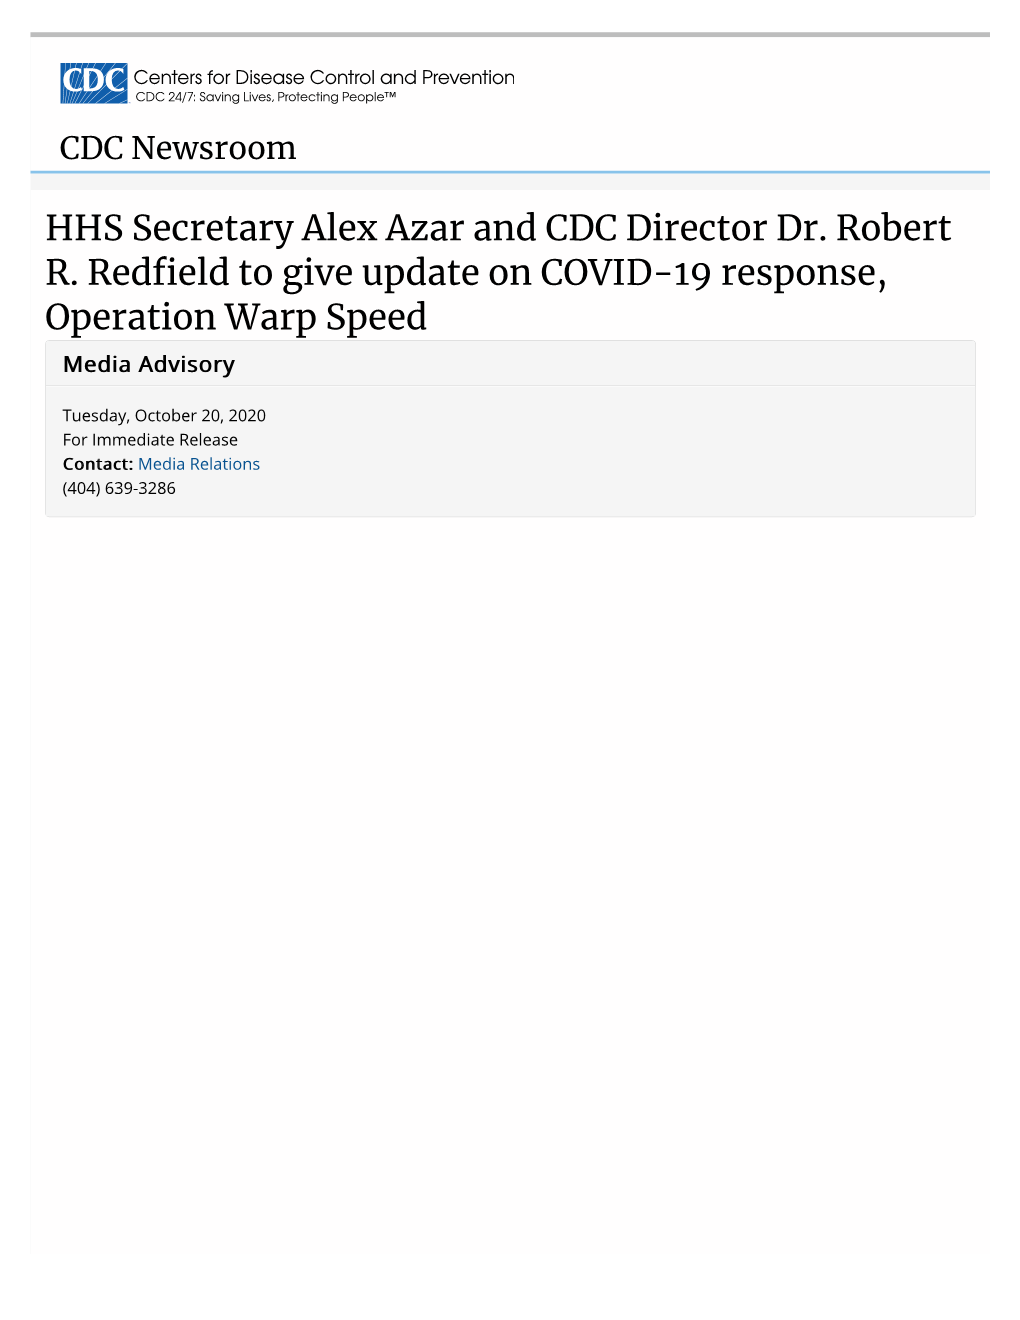 HHS Secretary Alex Azar and CDC Director Dr. Robert R. Redfield To